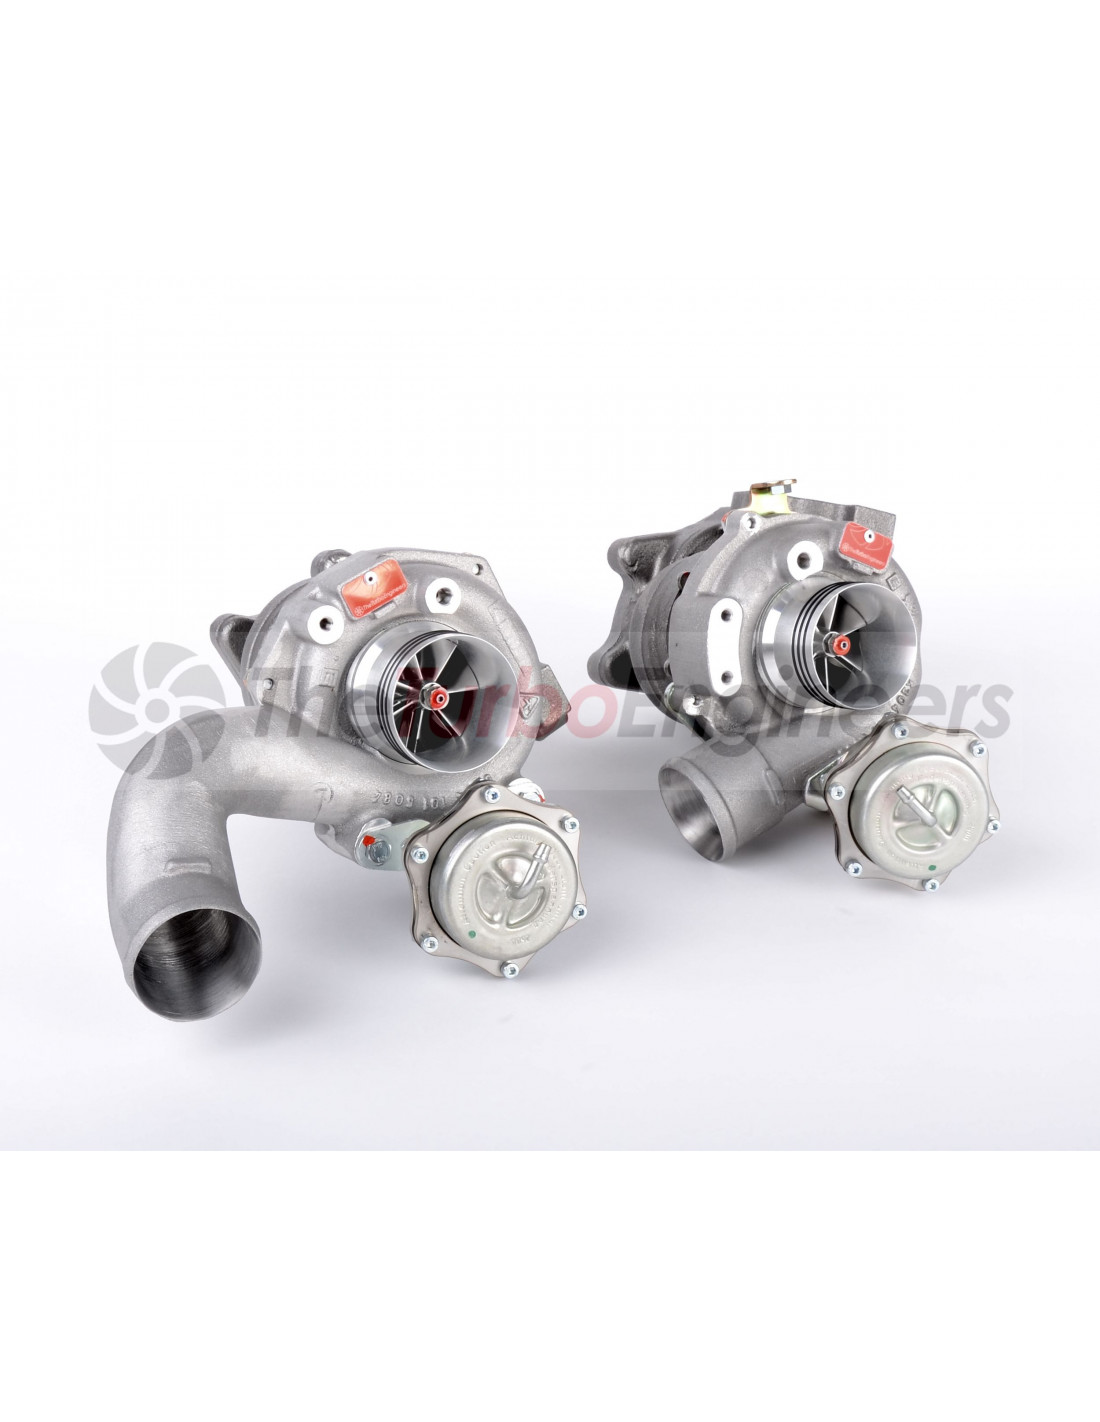 Rebuilt pair of TTE880 turbos for Audi S4 RS4 B5 and A6 C5 including  Allroad 2.7